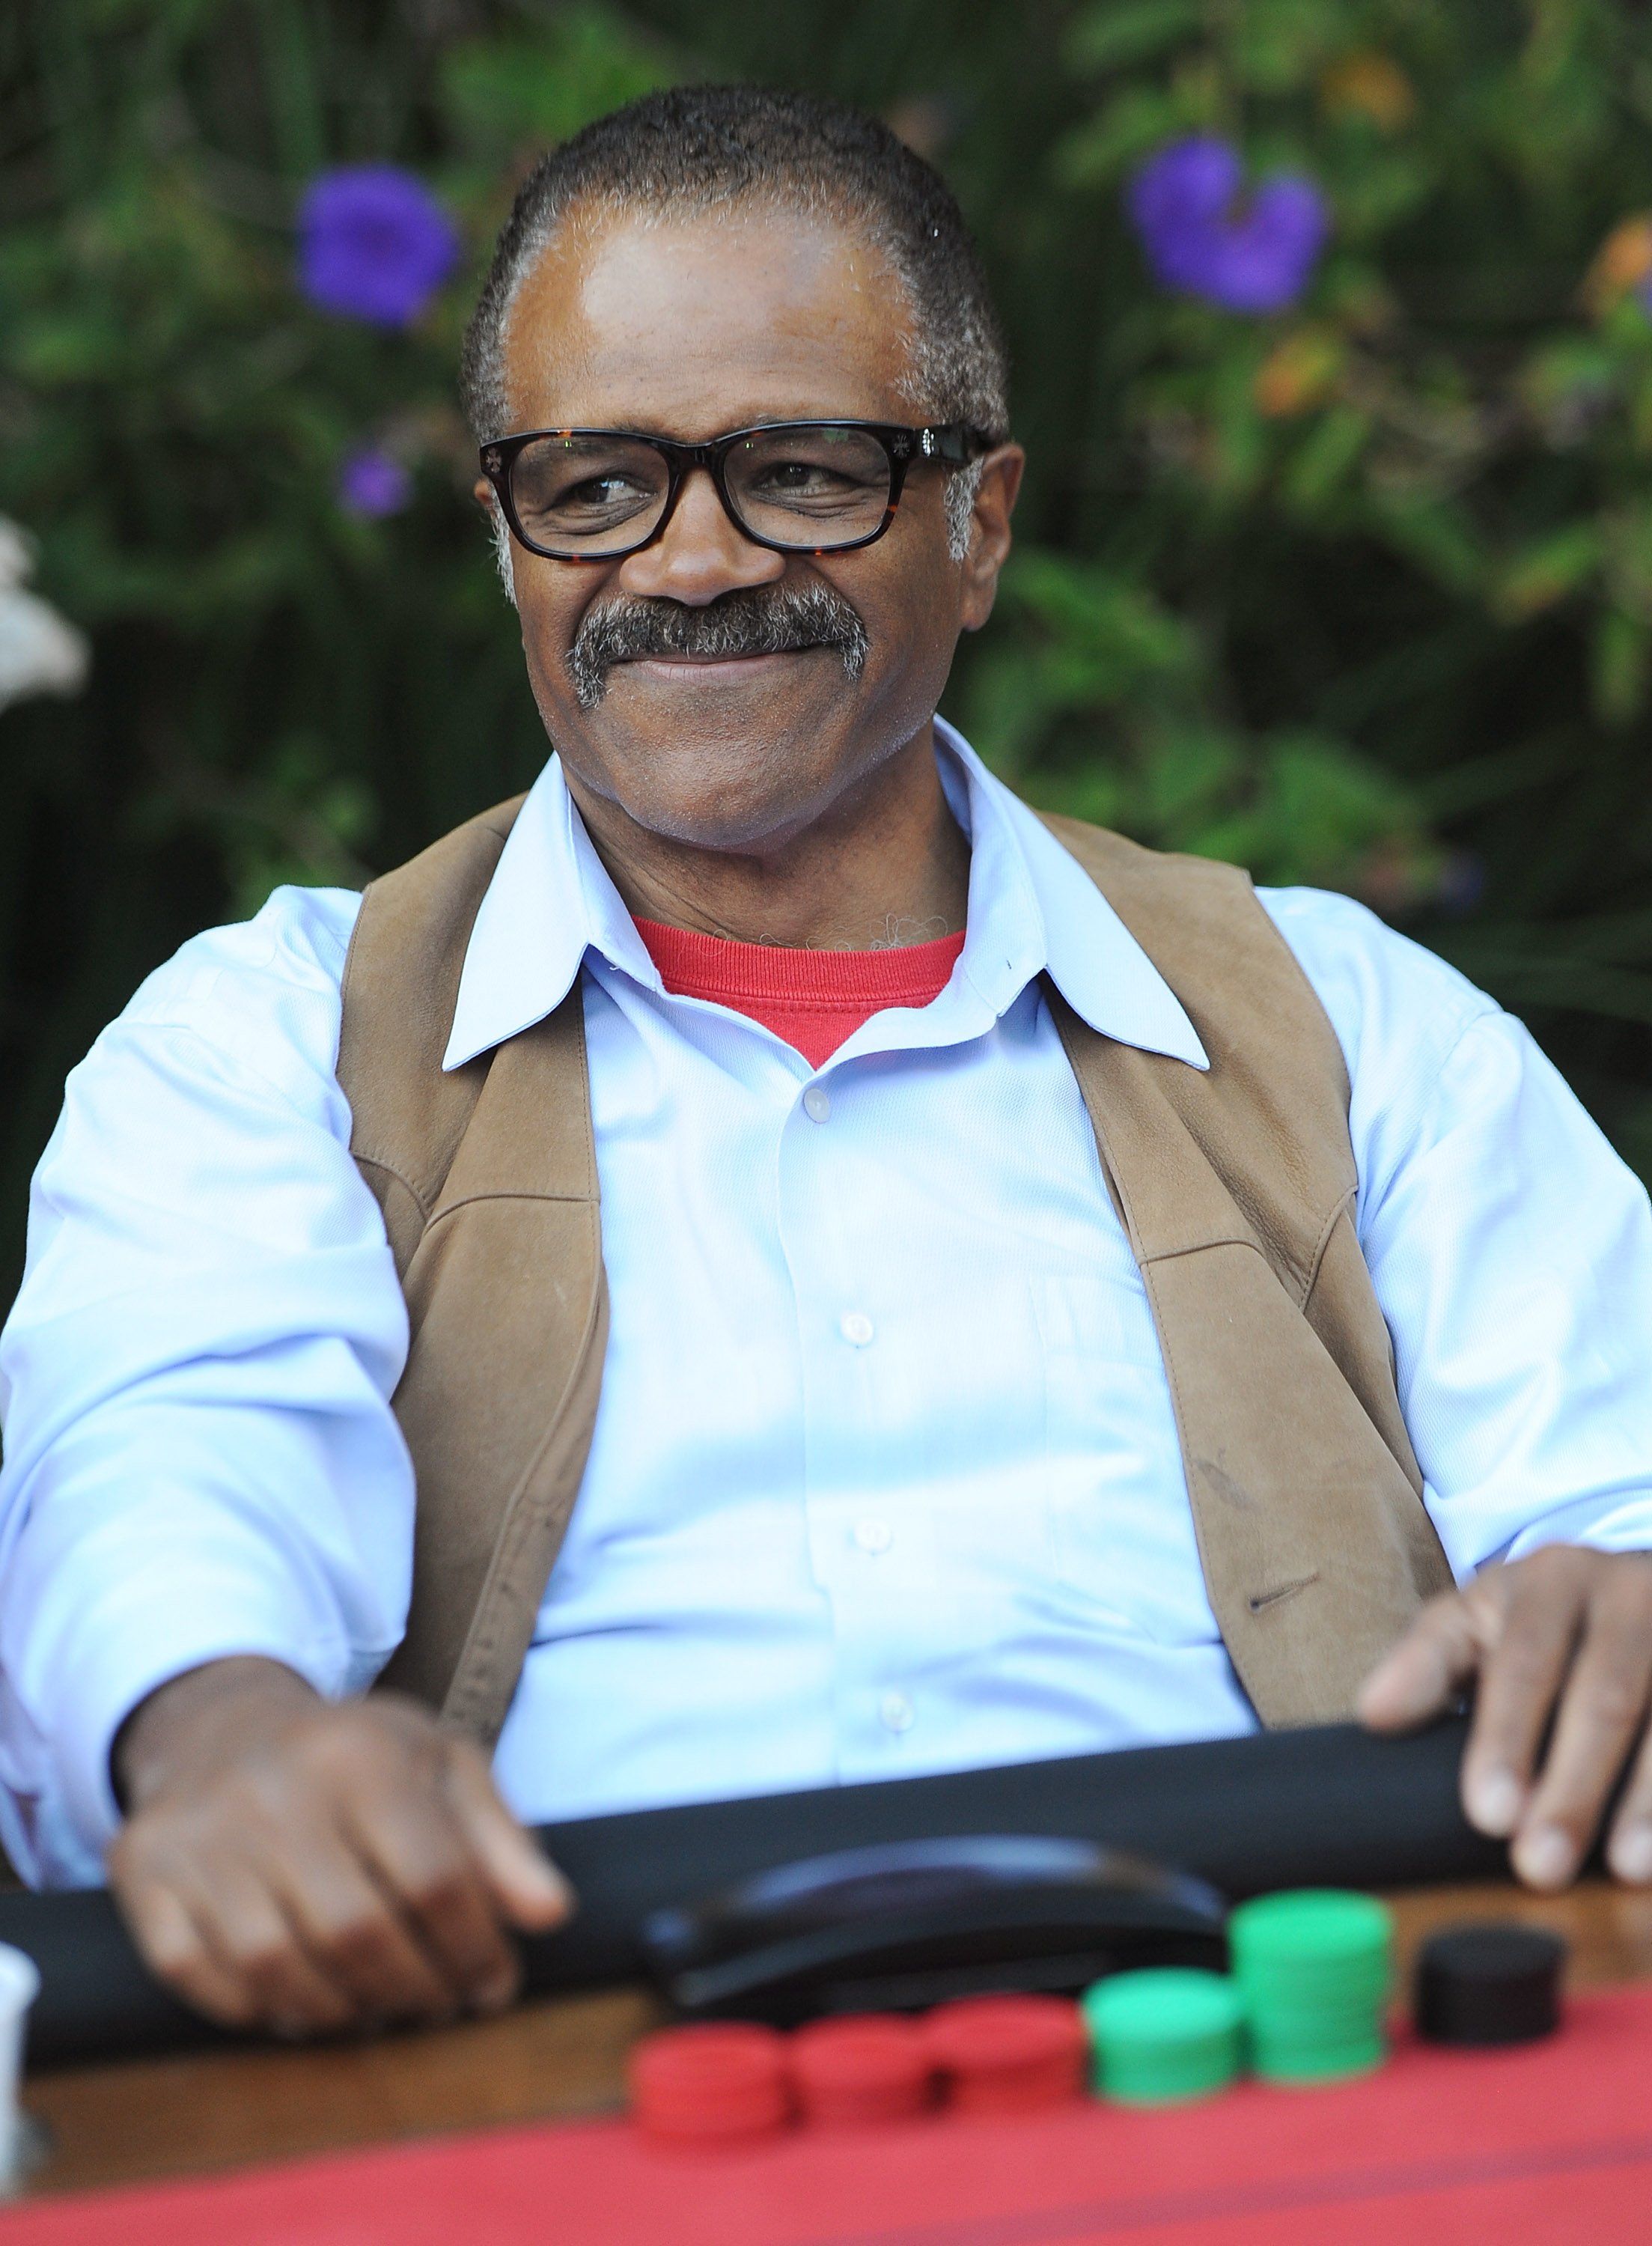 Ted Lange attends the SAG Foundation's 3rd Annual Poker Classic on August 24, 2013 | Photo: Getty Images